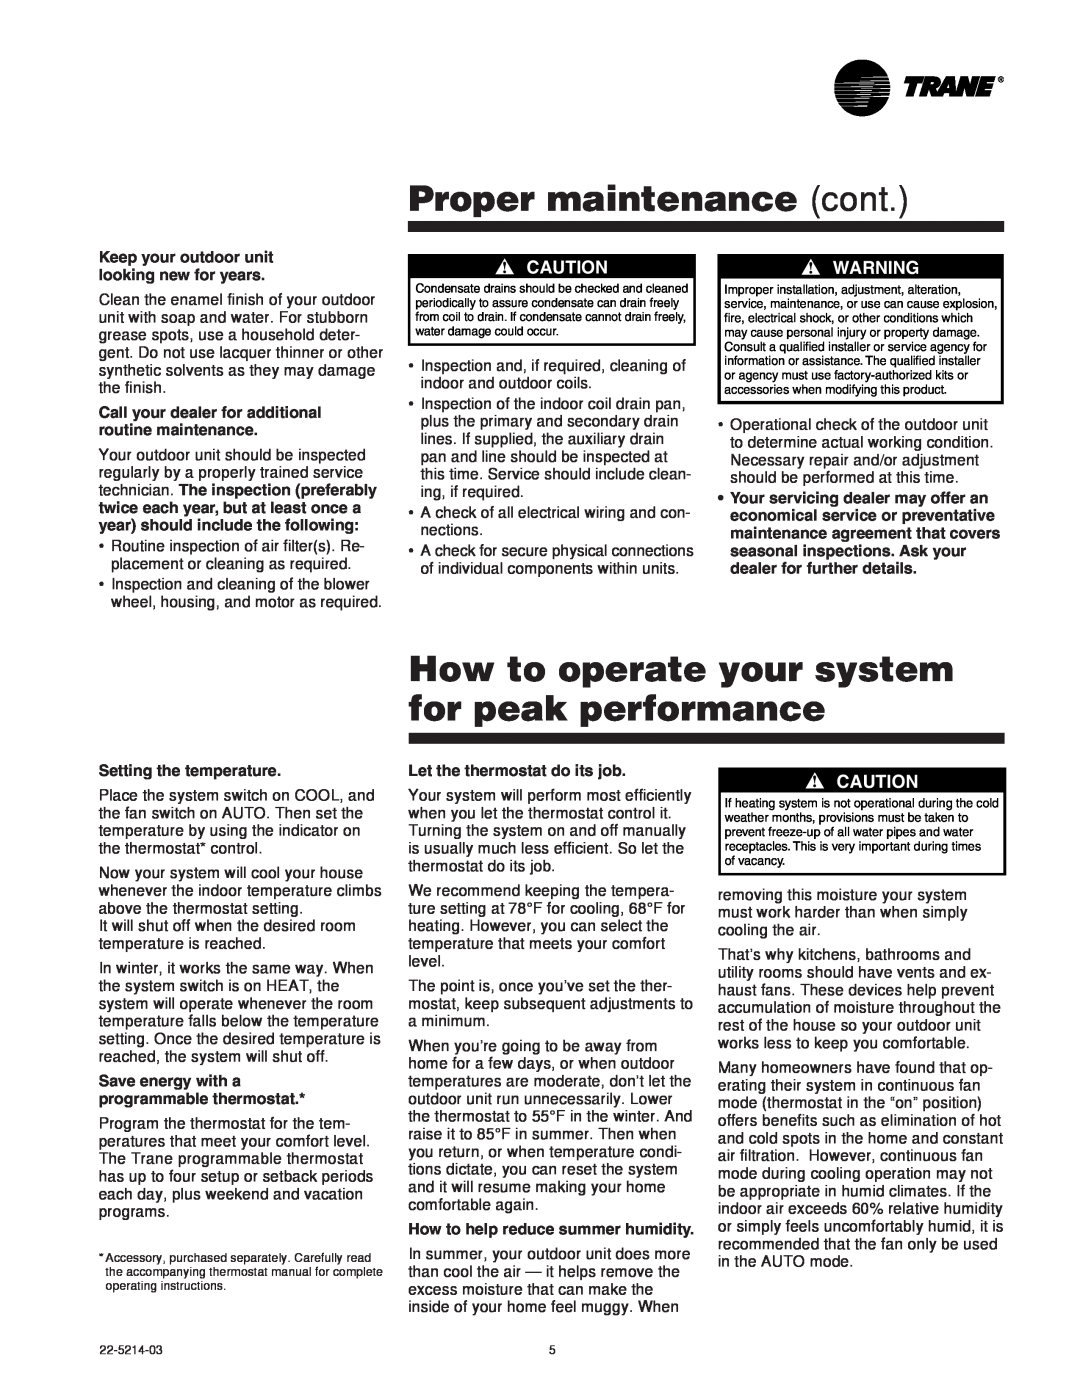 Trane 22-5214-03 manual Proper maintenance cont, How to operate your system for peak performance, Setting the temperature 